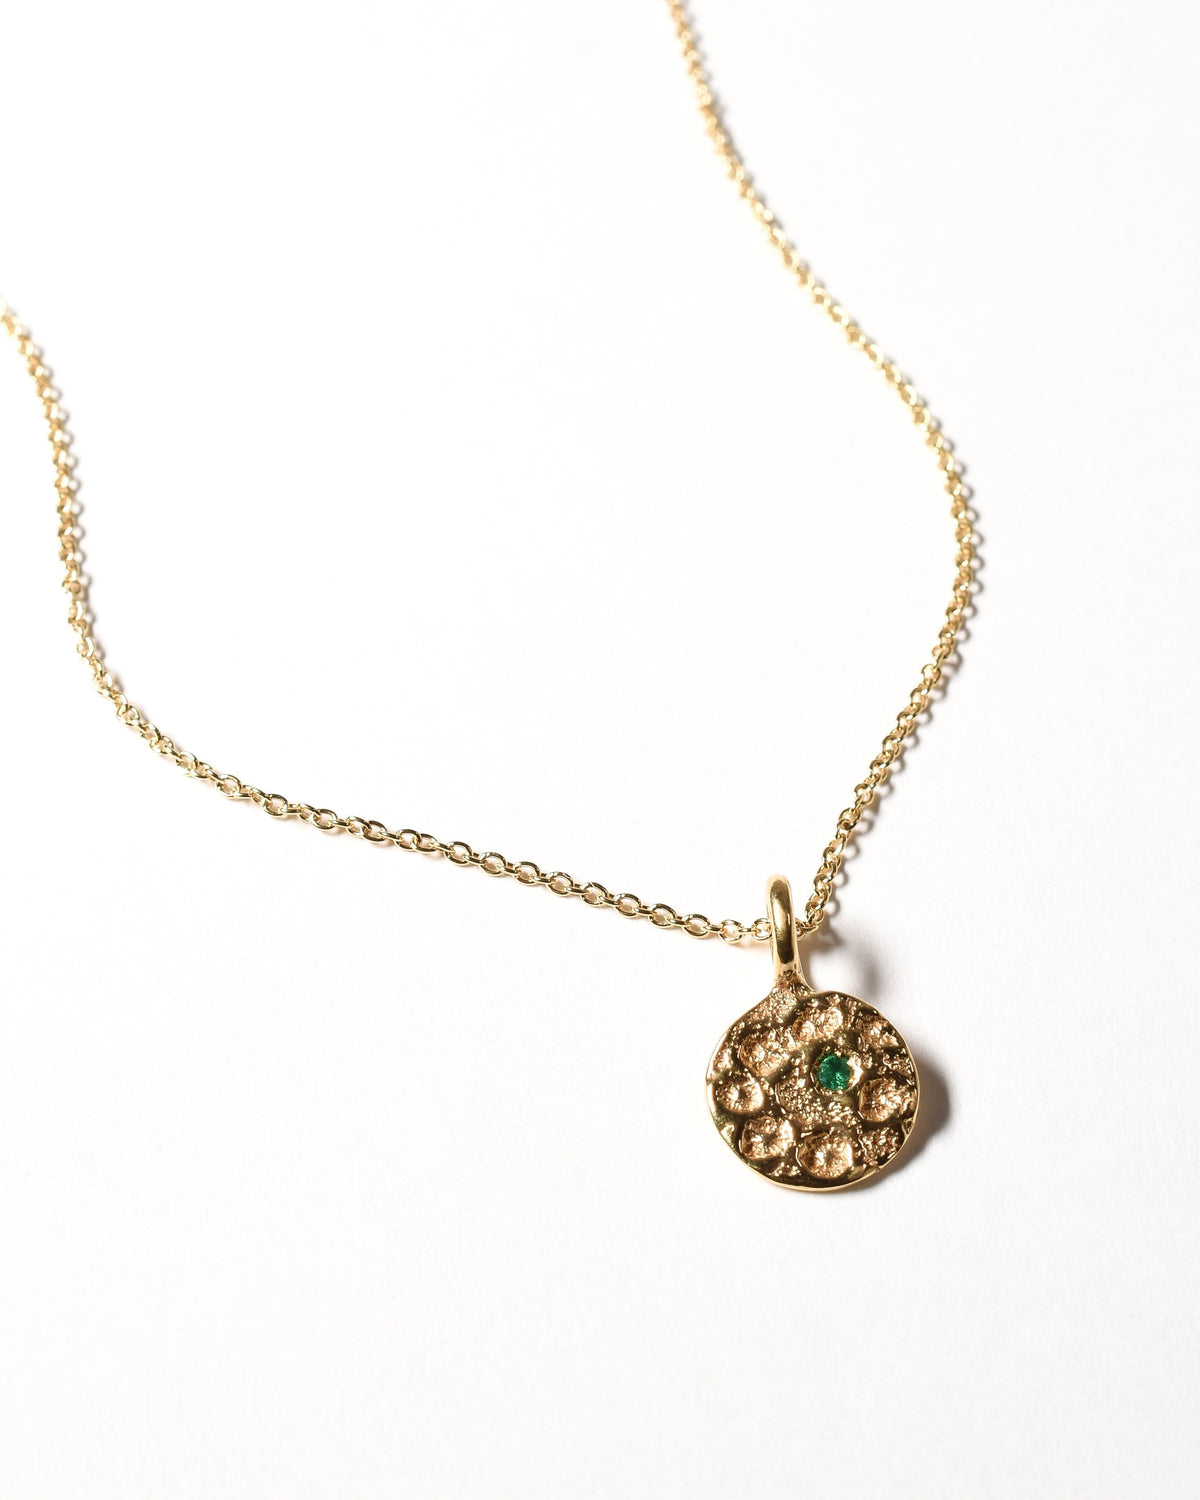 Emerald Birthstone Necklace - May - Yellow Gold